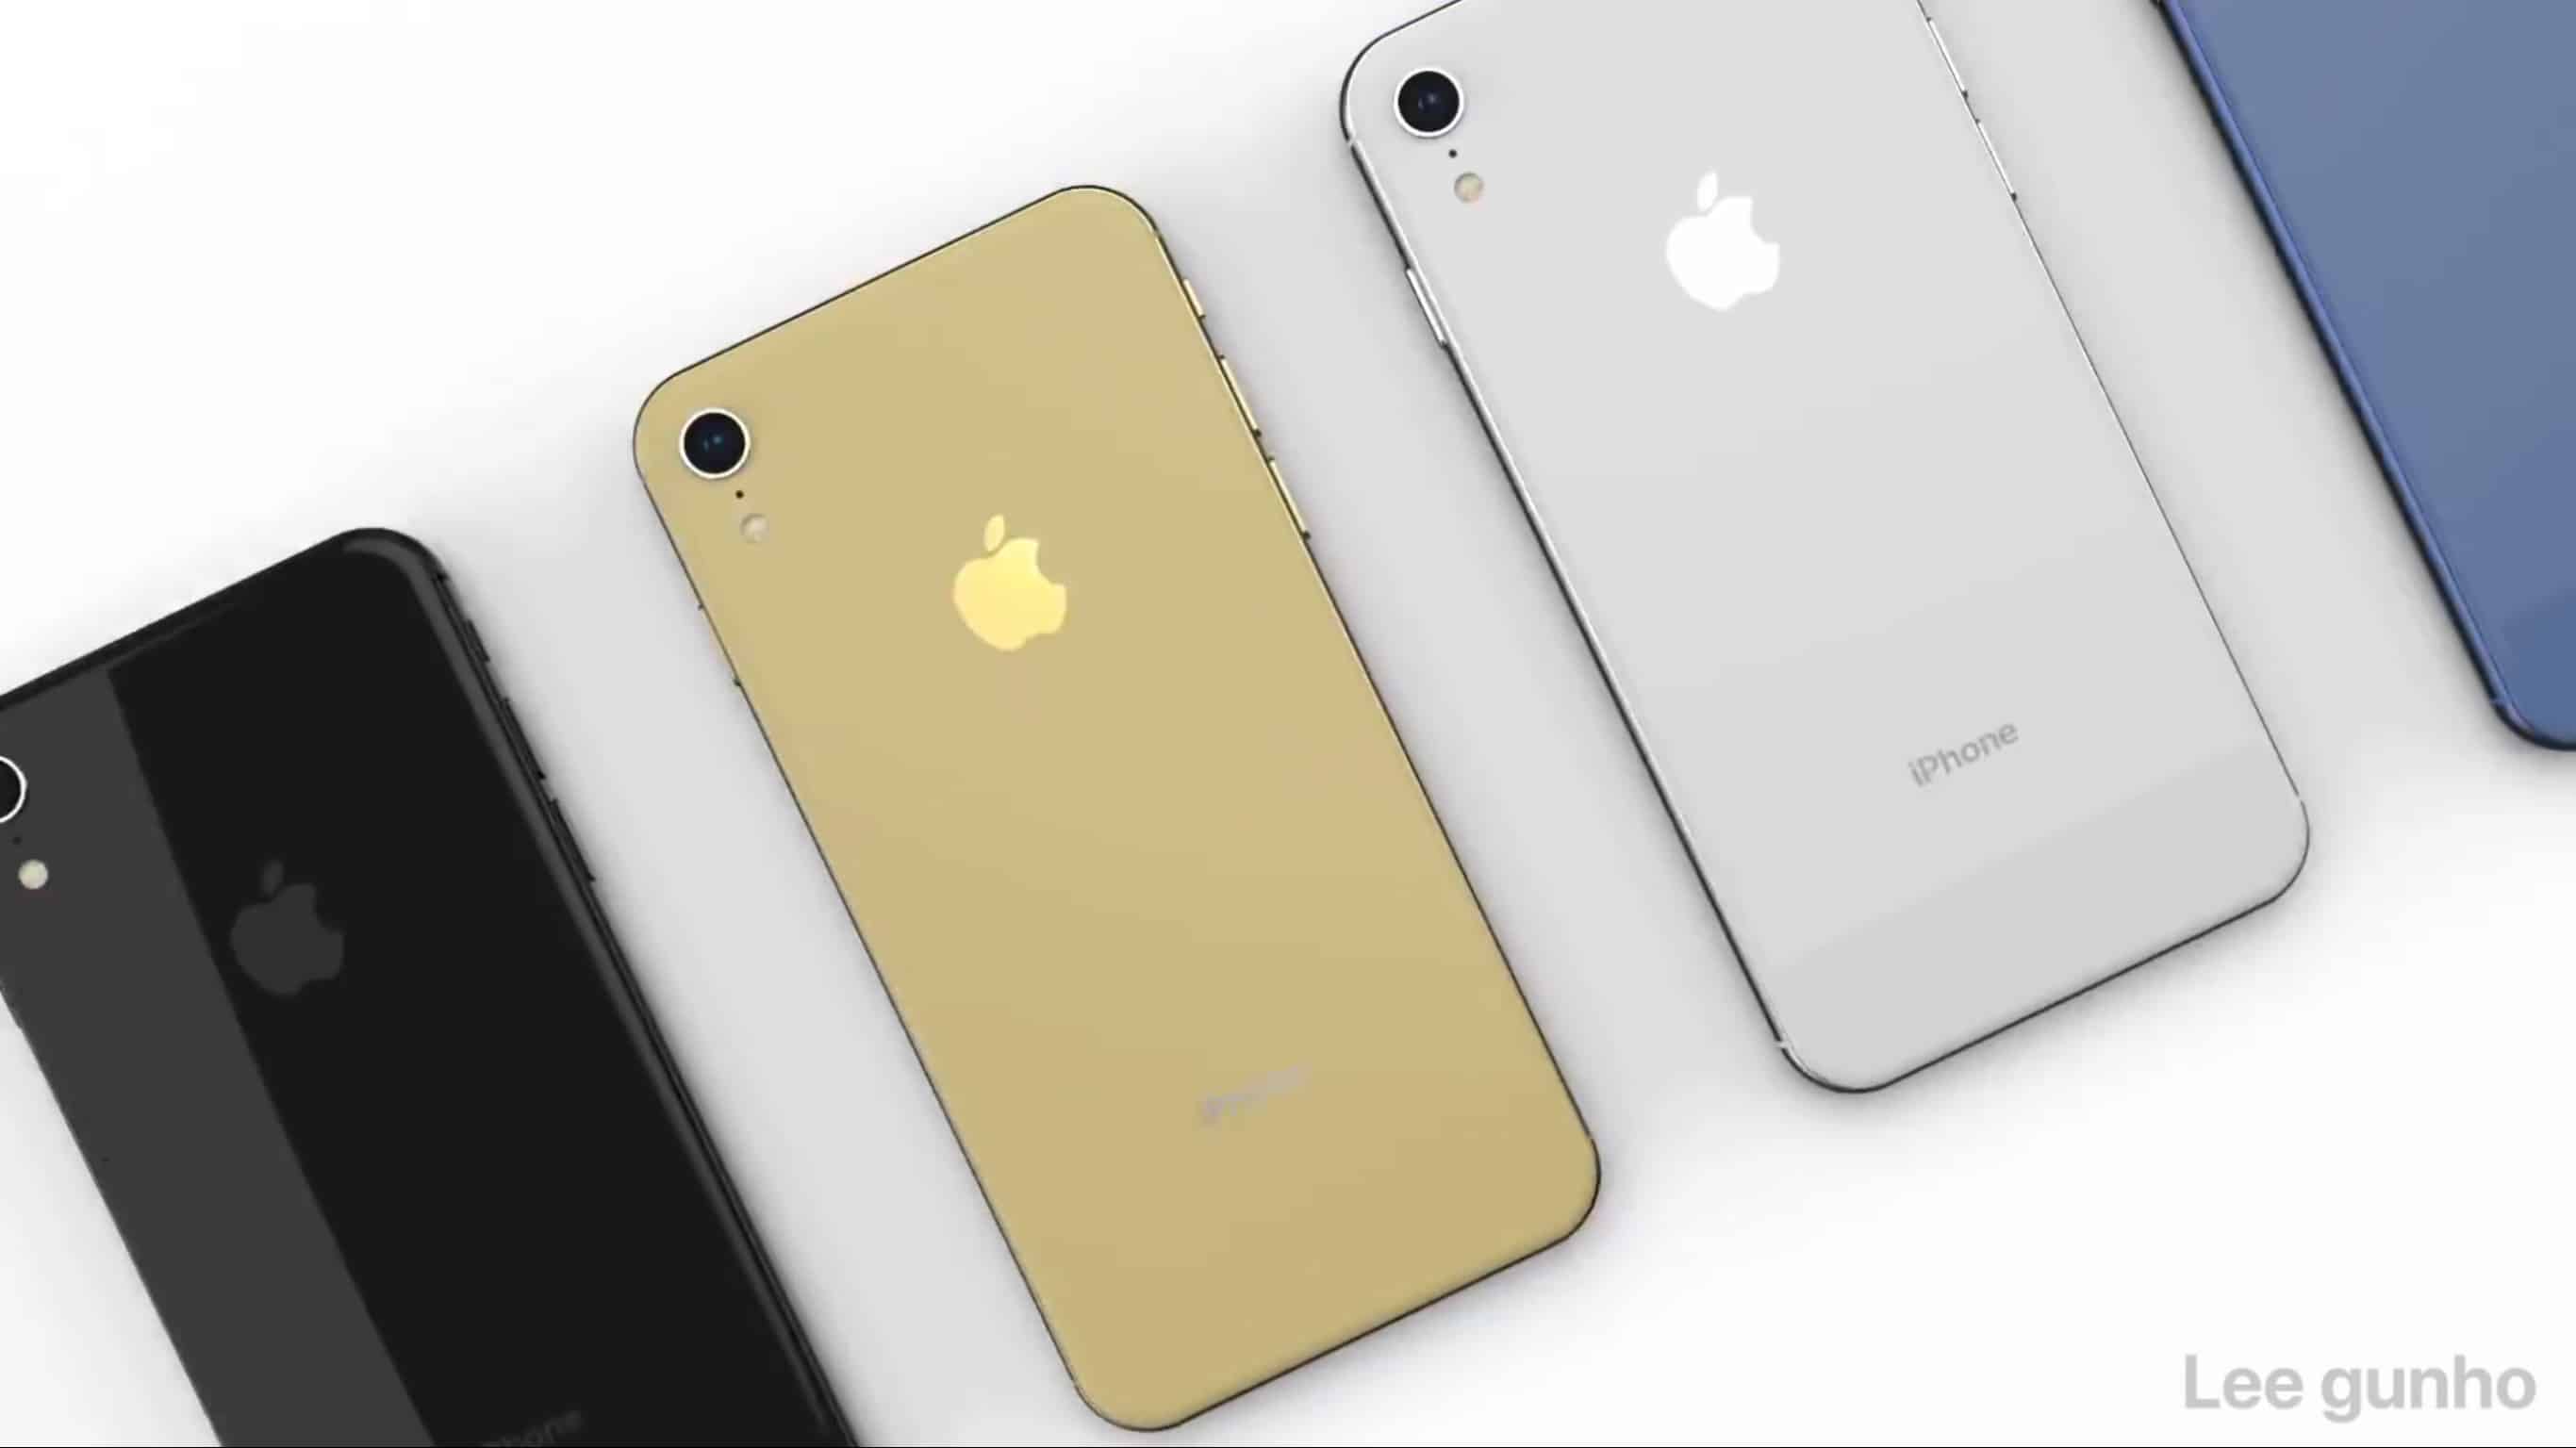 Here's what the advertising for the iPhone 9 might look like.